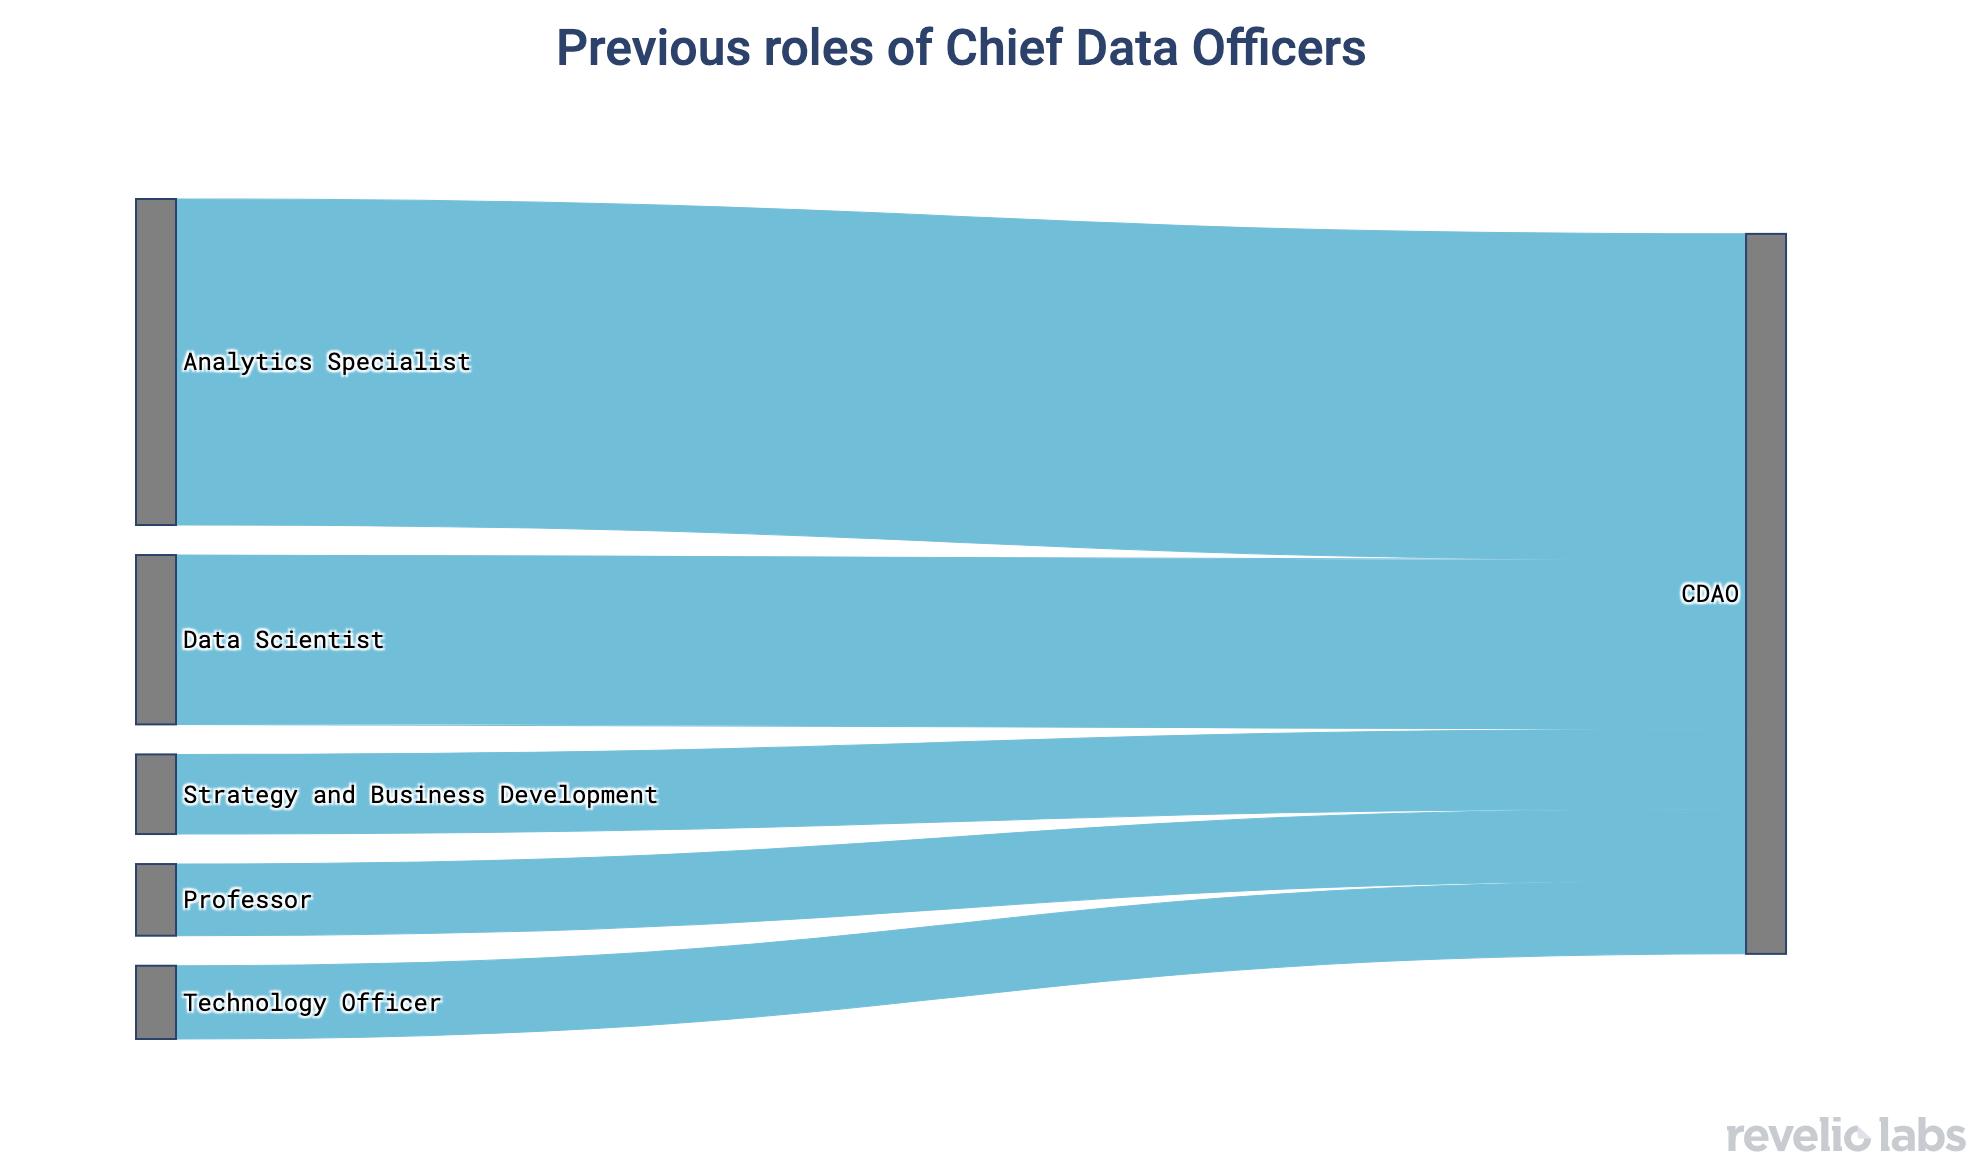 Previous Roles of Chief Data Officers